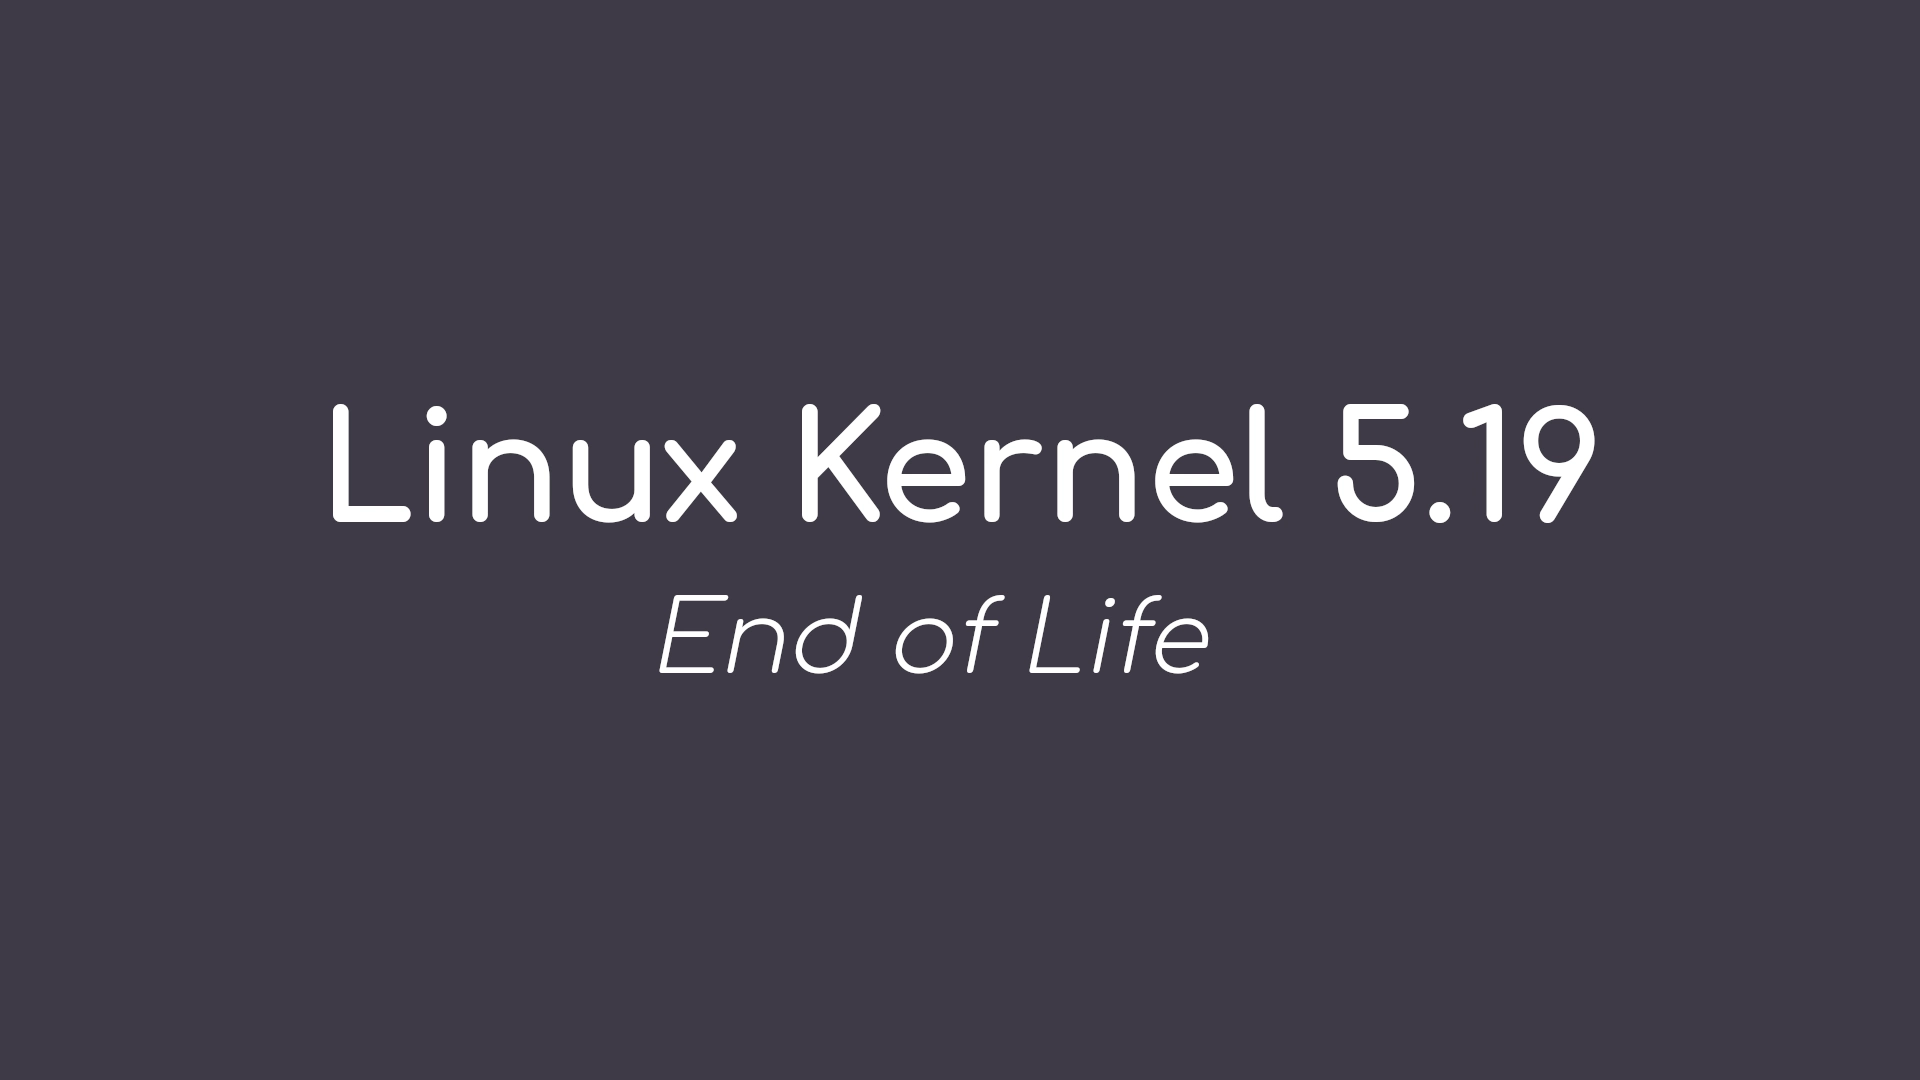 Linux Kernel 5.19 Reached End of Life, Users Urged to Upgrade to Linux Kernel 6.0